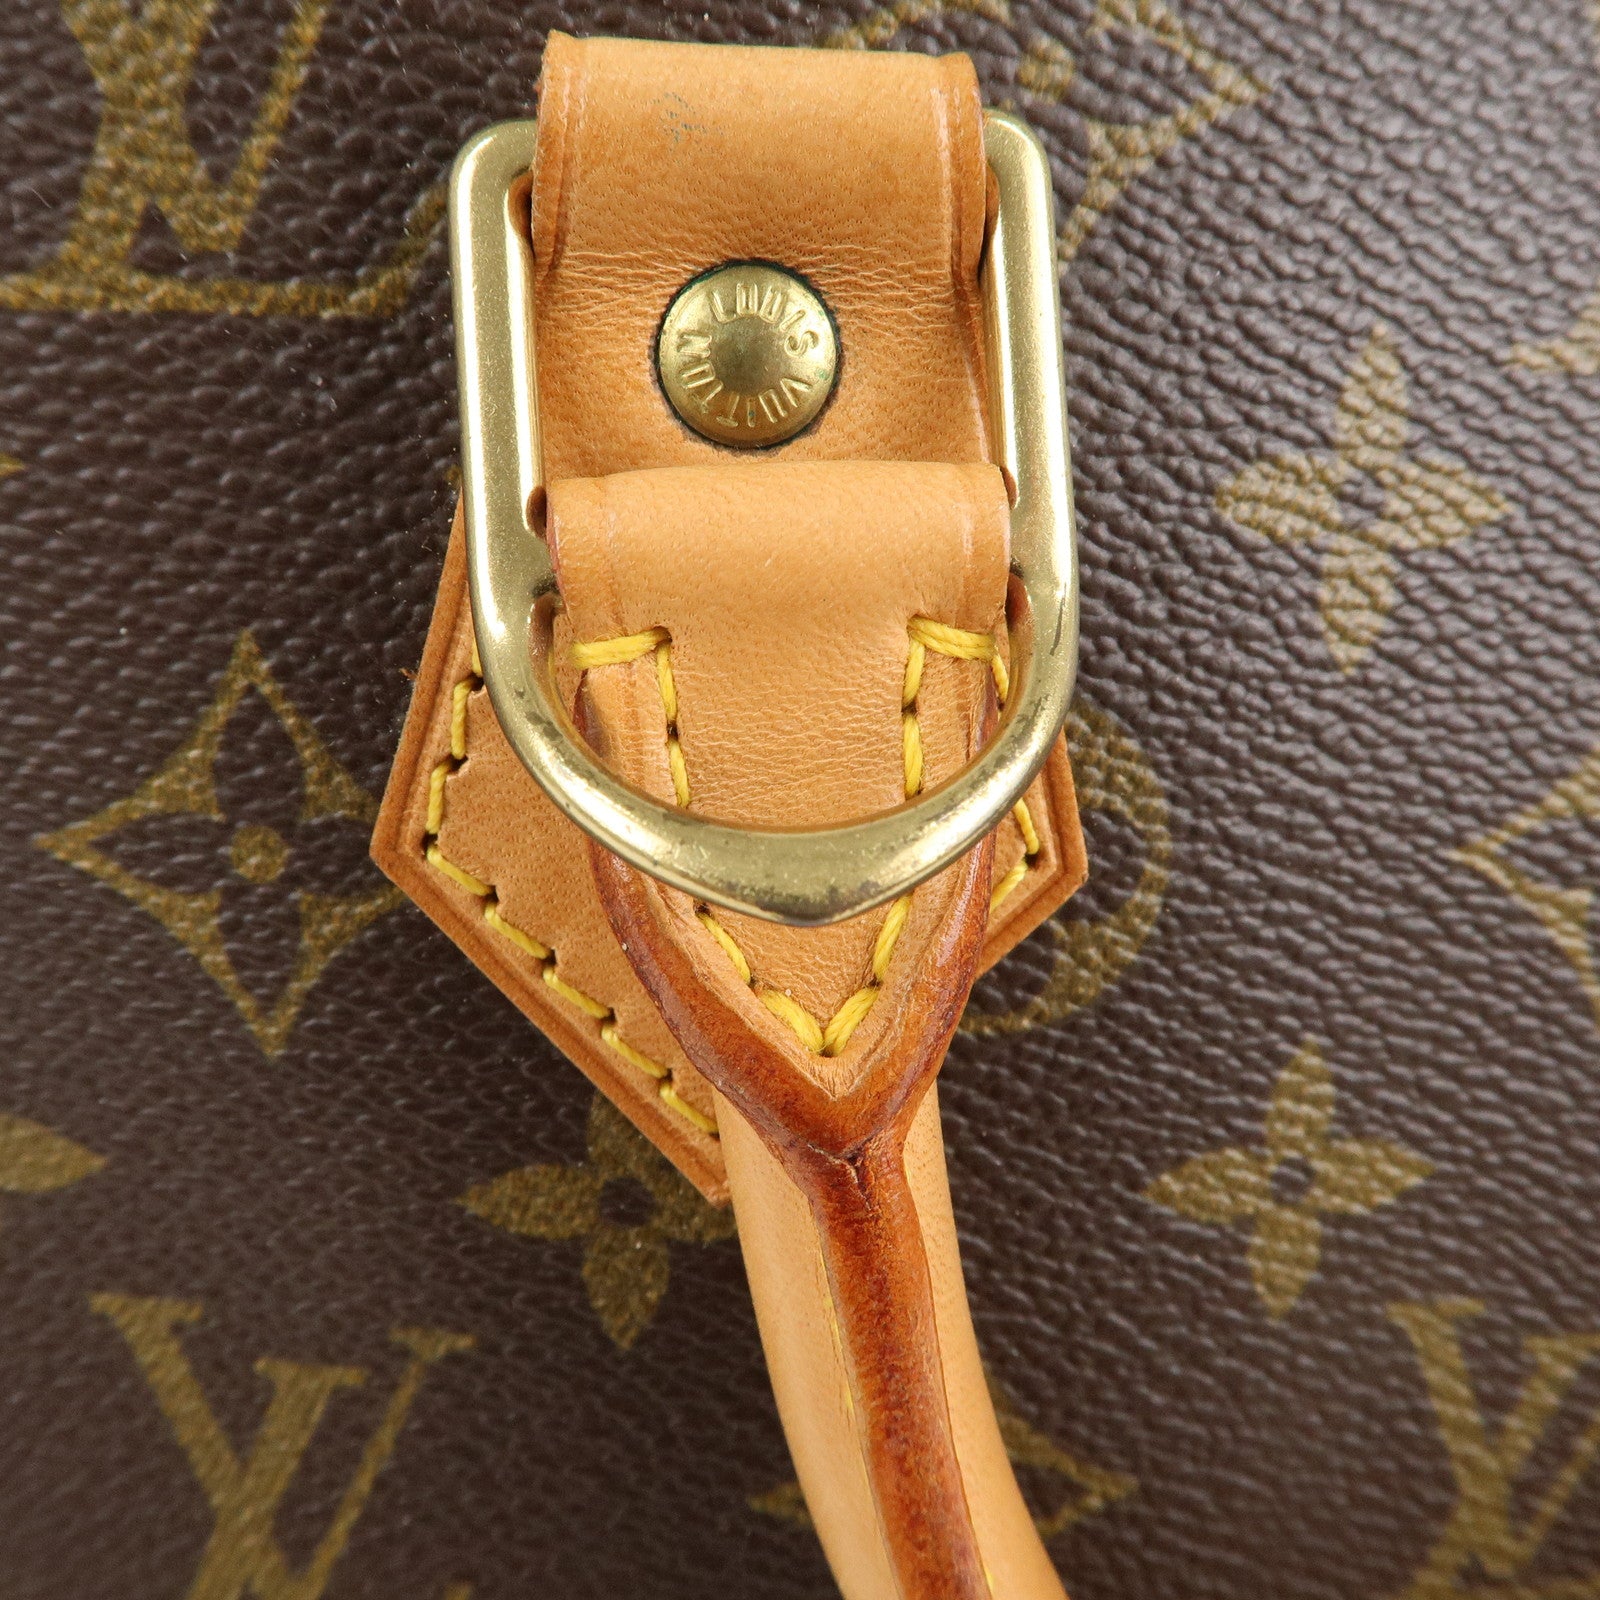 Is this Louis Vuitton Alma Authentic? Date Code Br - The